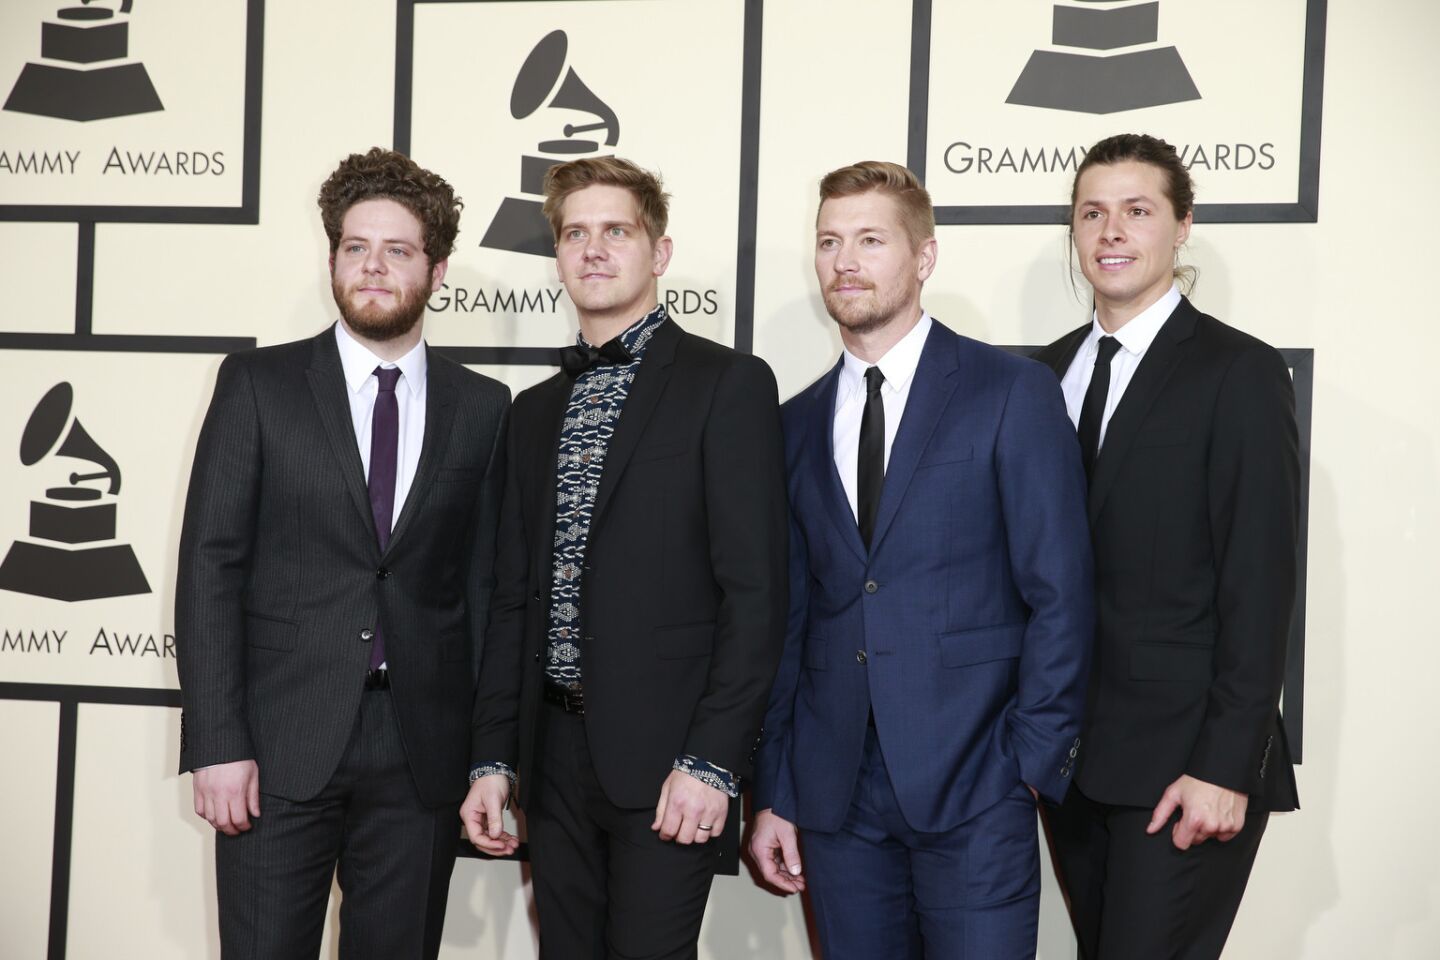 The band needtobreathe, at the Grammys with "Multiplied," nominated in the contemporary Christian music performance/song category.